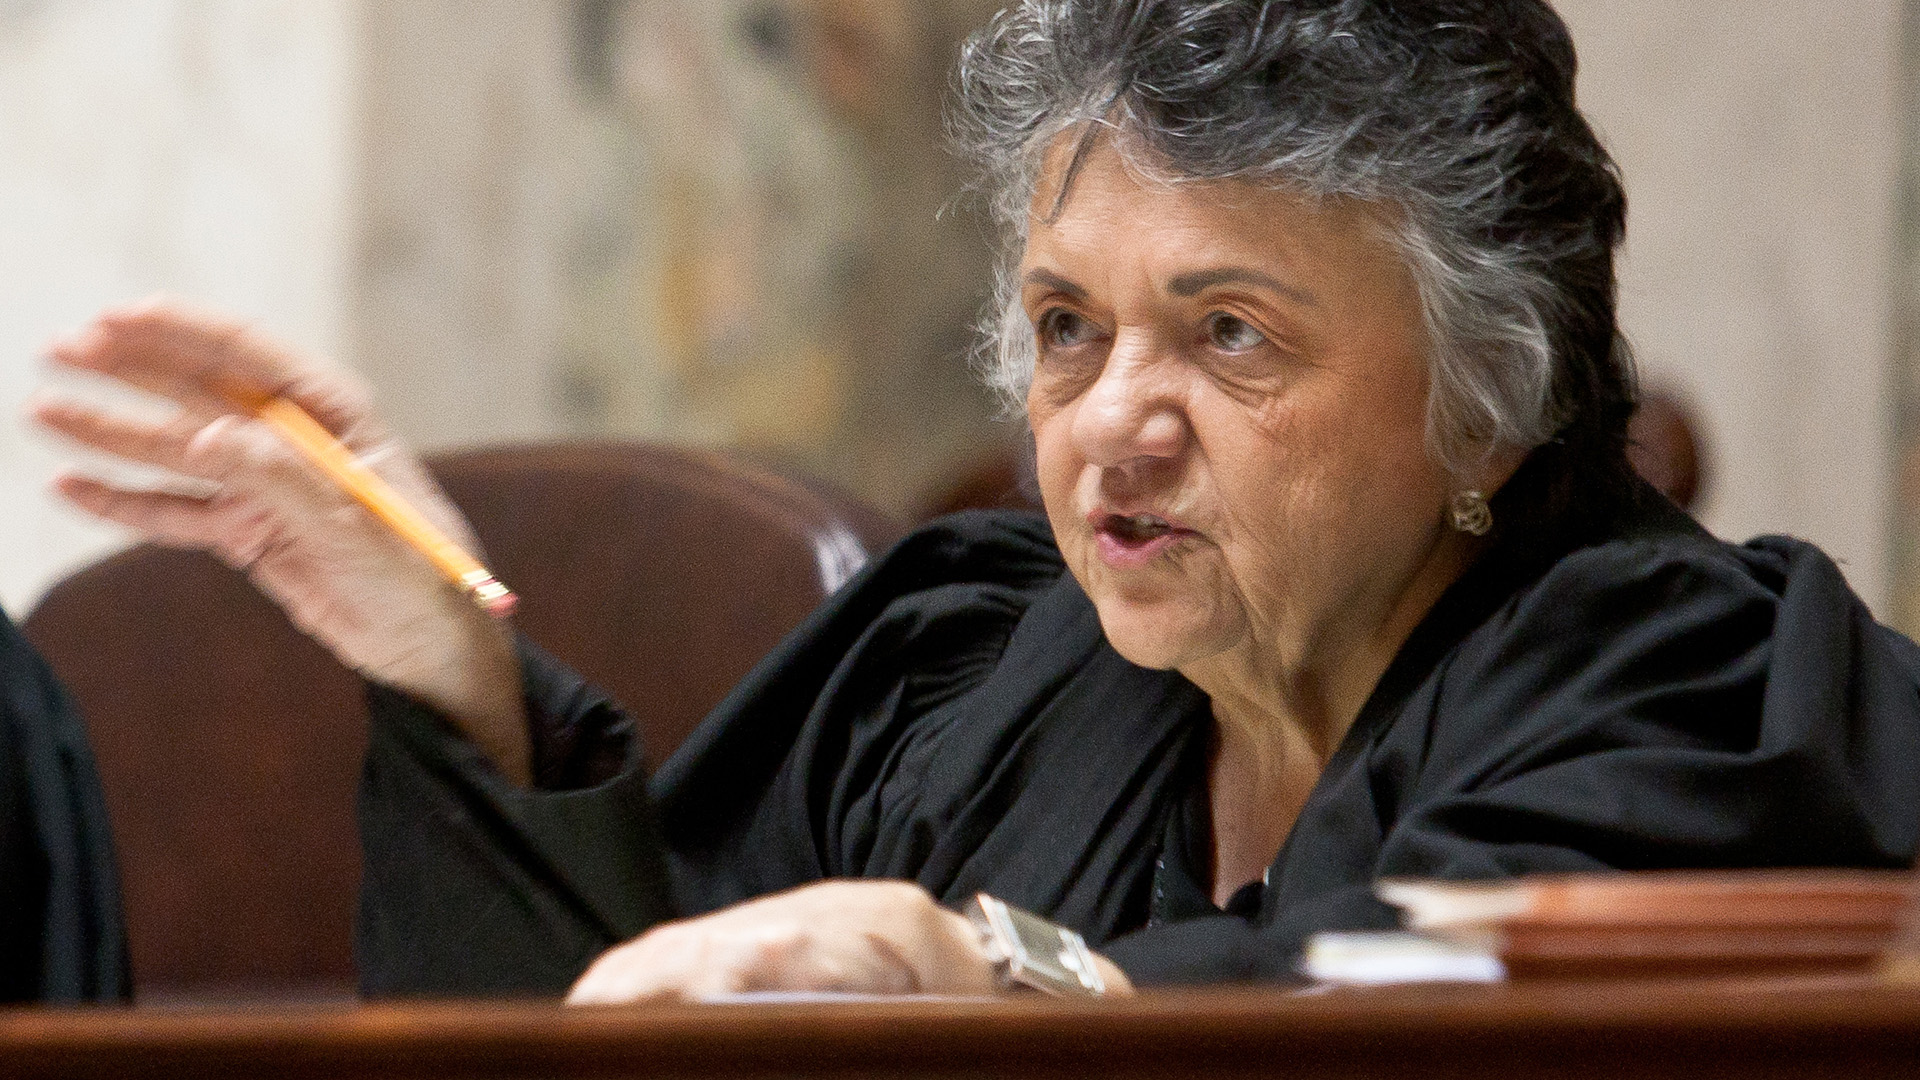 Shirley Abrahamson sits at a dais and speaks while gesturing with her right hand.